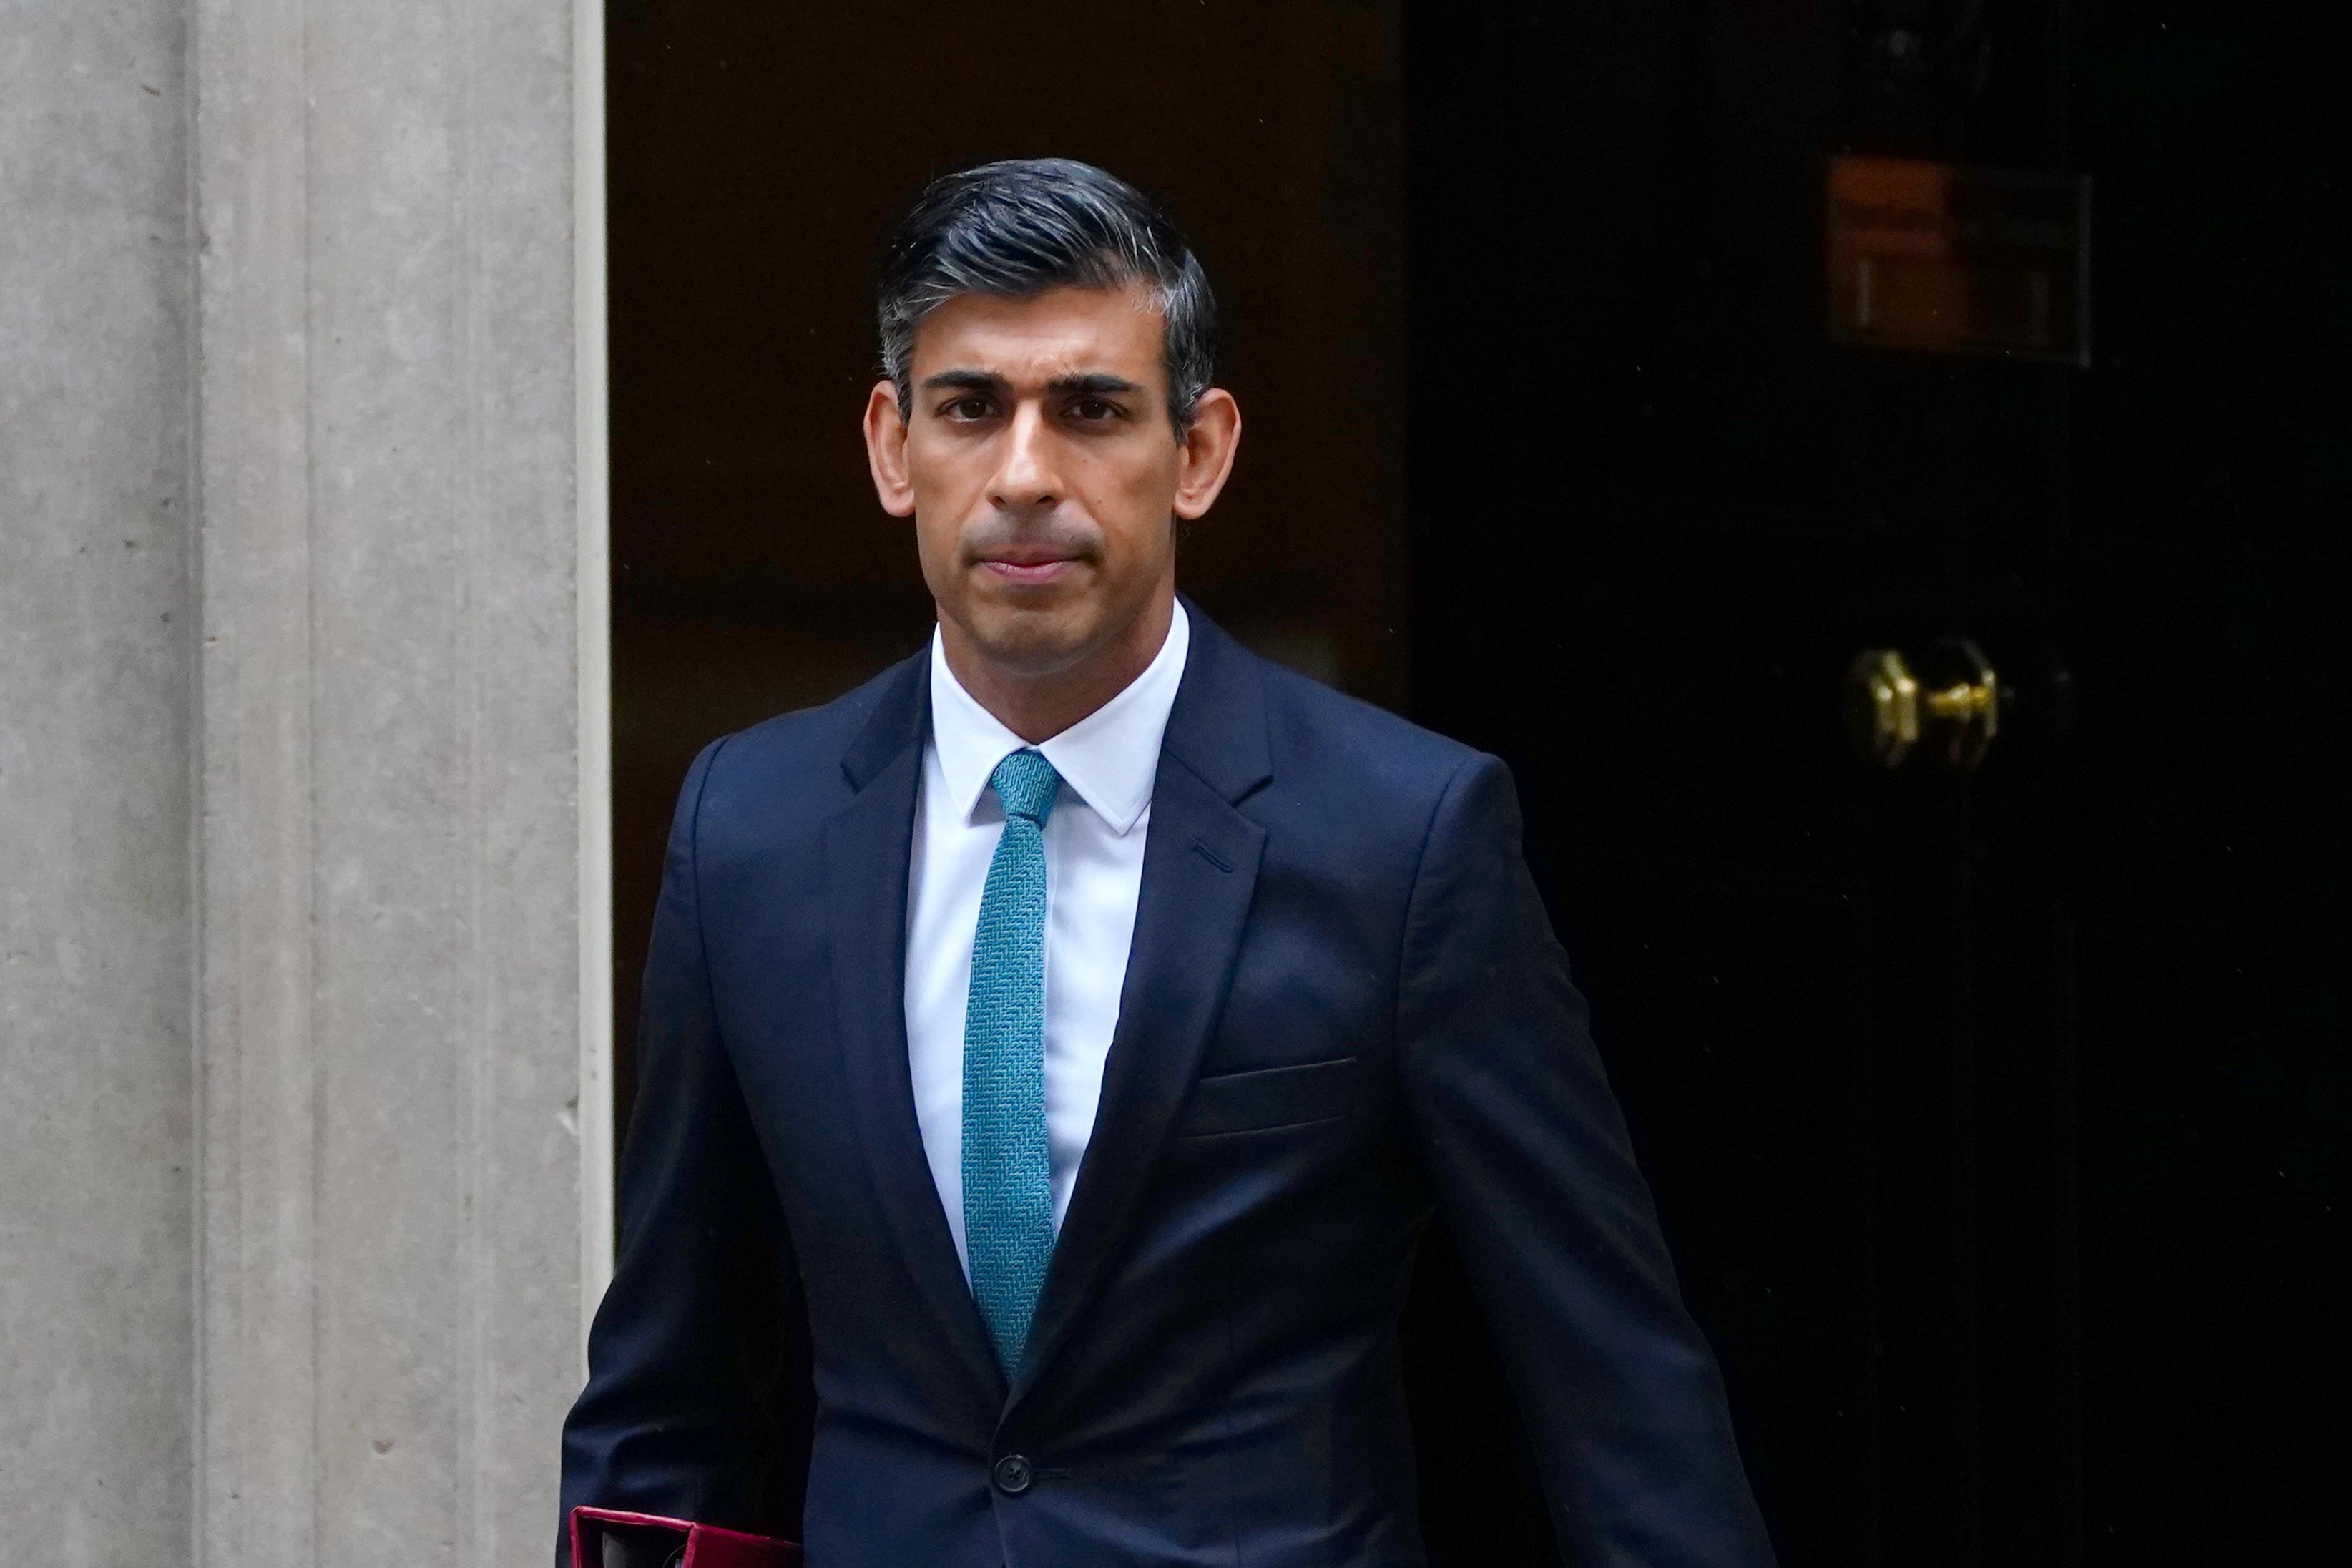 Rishi Sunak has demoted allies of Liz Truss and rewarded his own supporters as he ploughed on with a ministerial shake-up drawing on all factions of the embattled Tory party (Victoria Jones/PA)